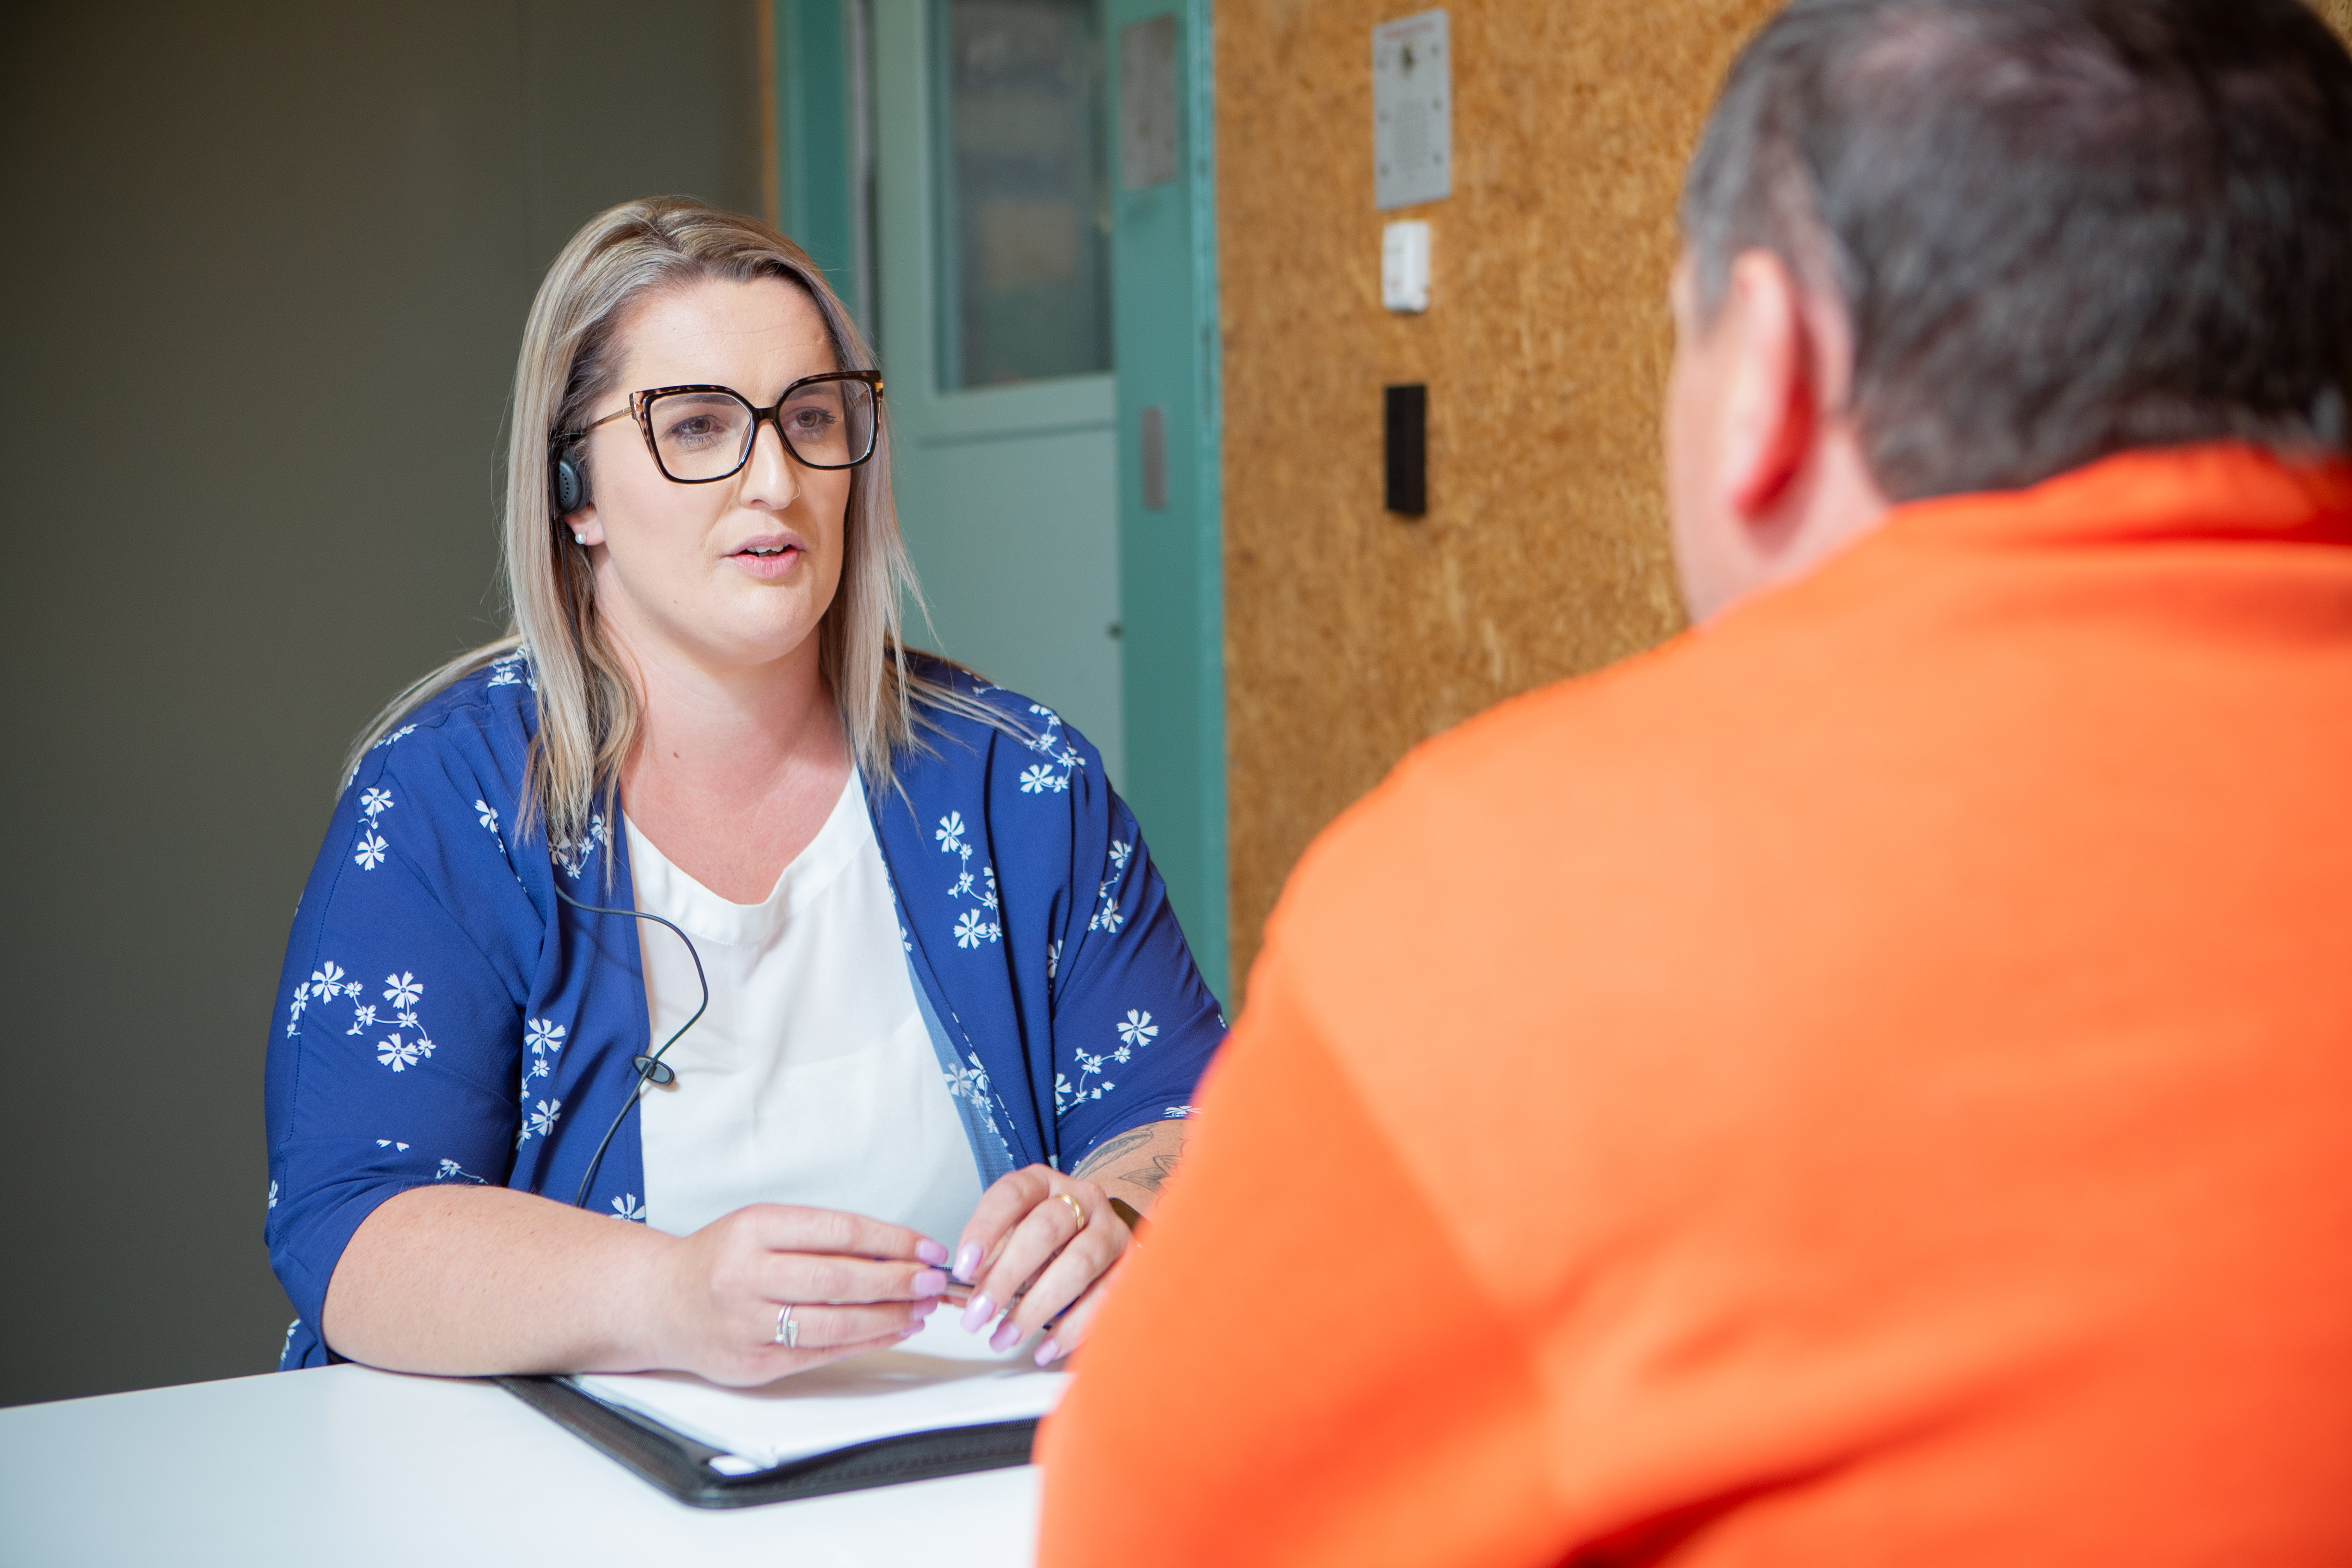 Case manager having a meeting with a person in prison